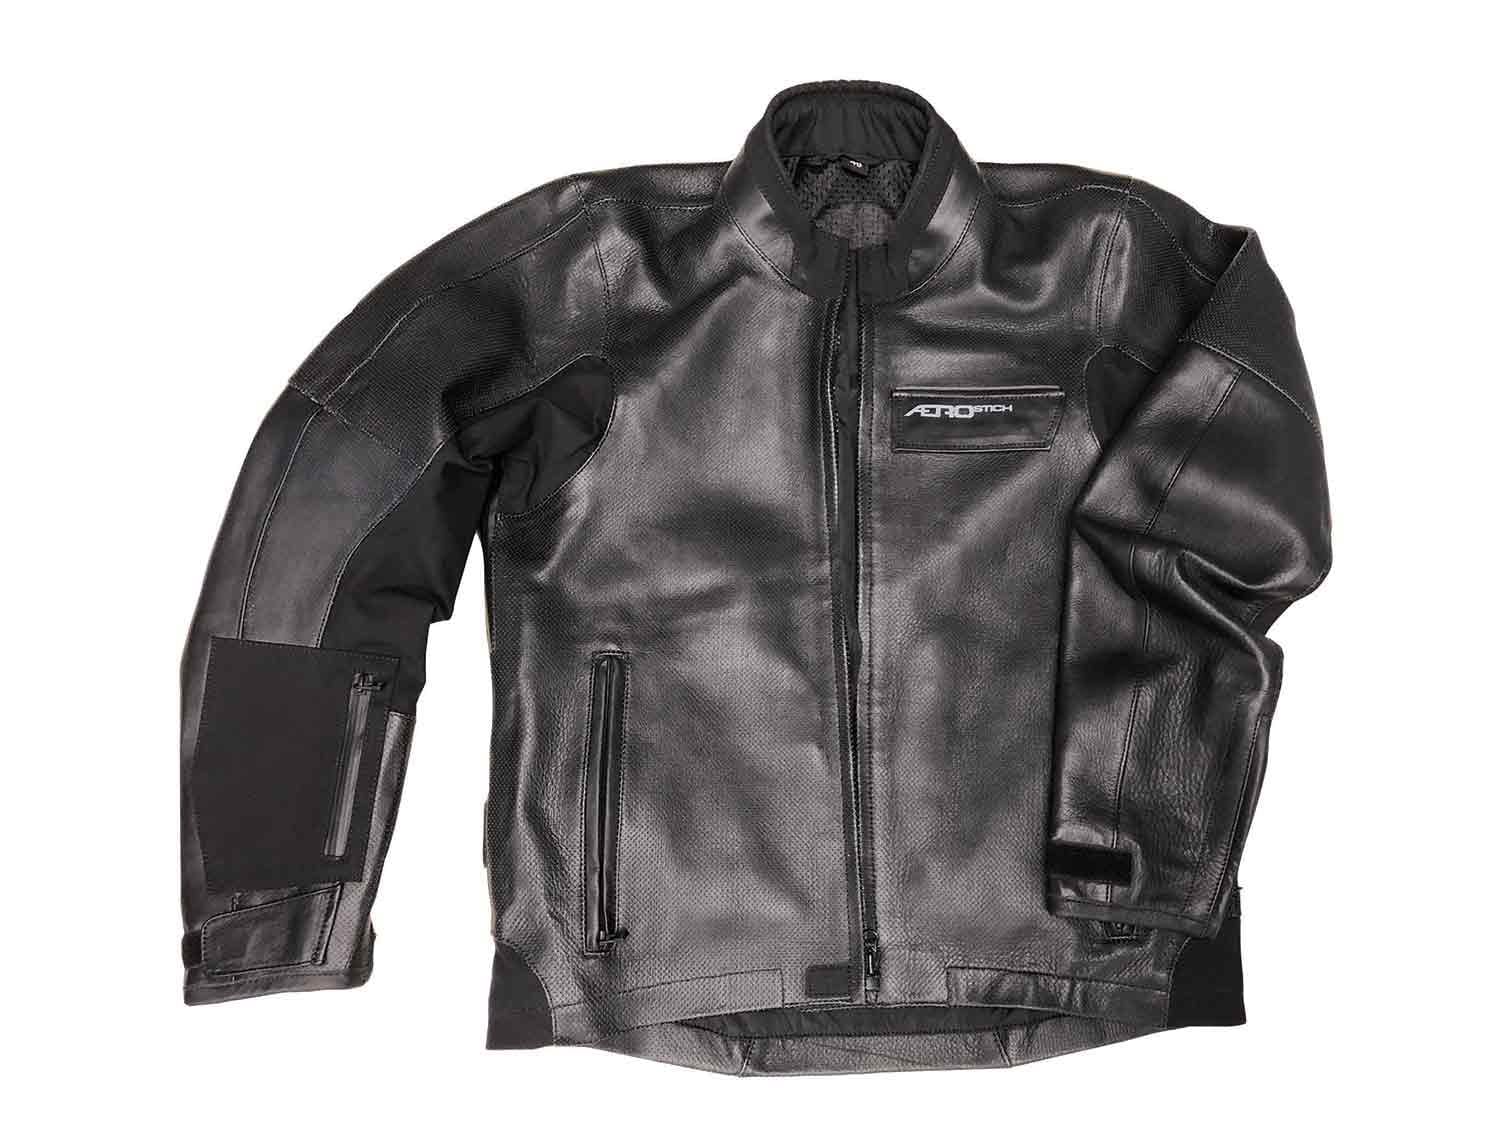 Trust us, you’ll want to get the stank off your motorcycle gear before putting it into storage.